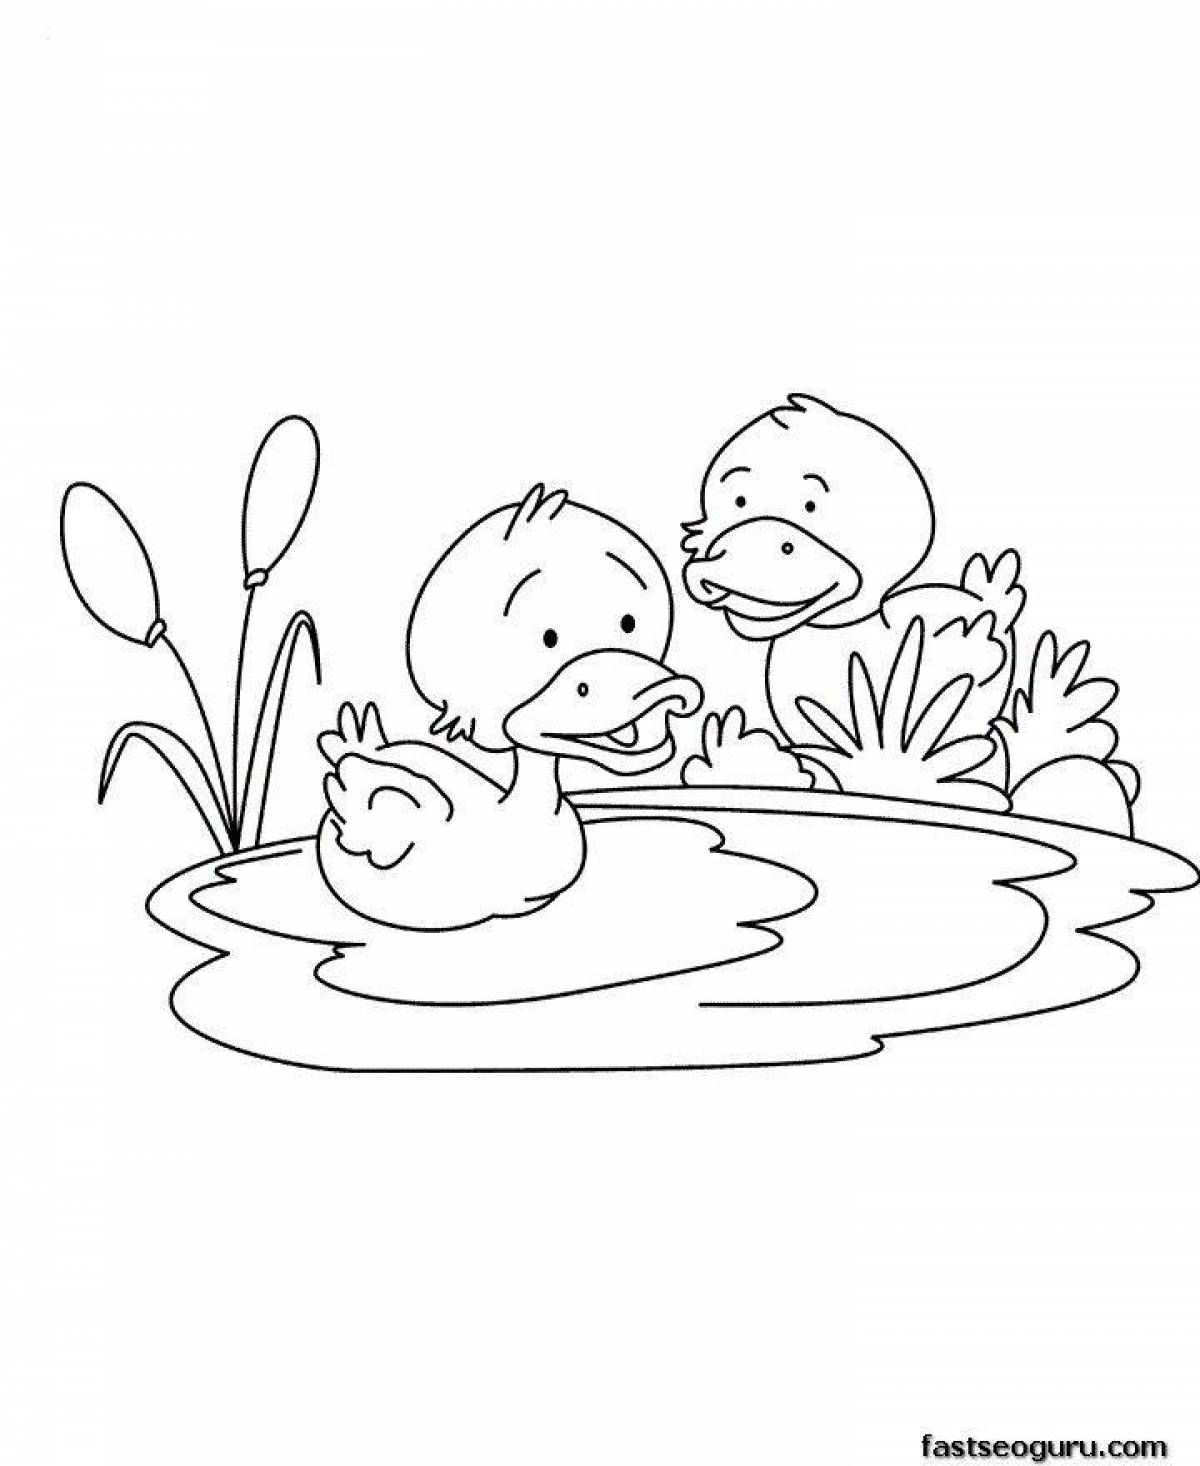 Live duck coloring for kids